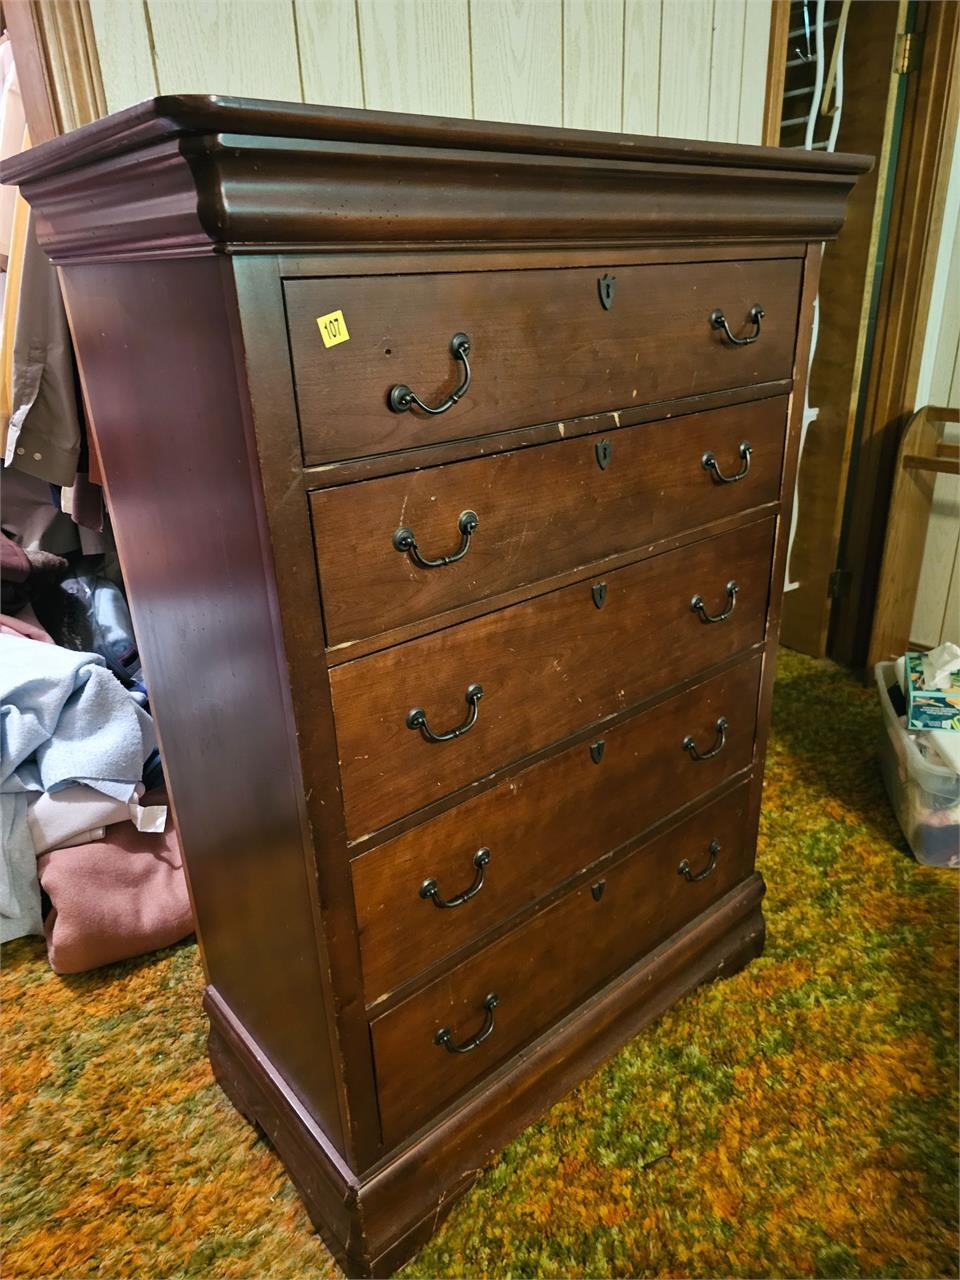 5' Chest of drawers